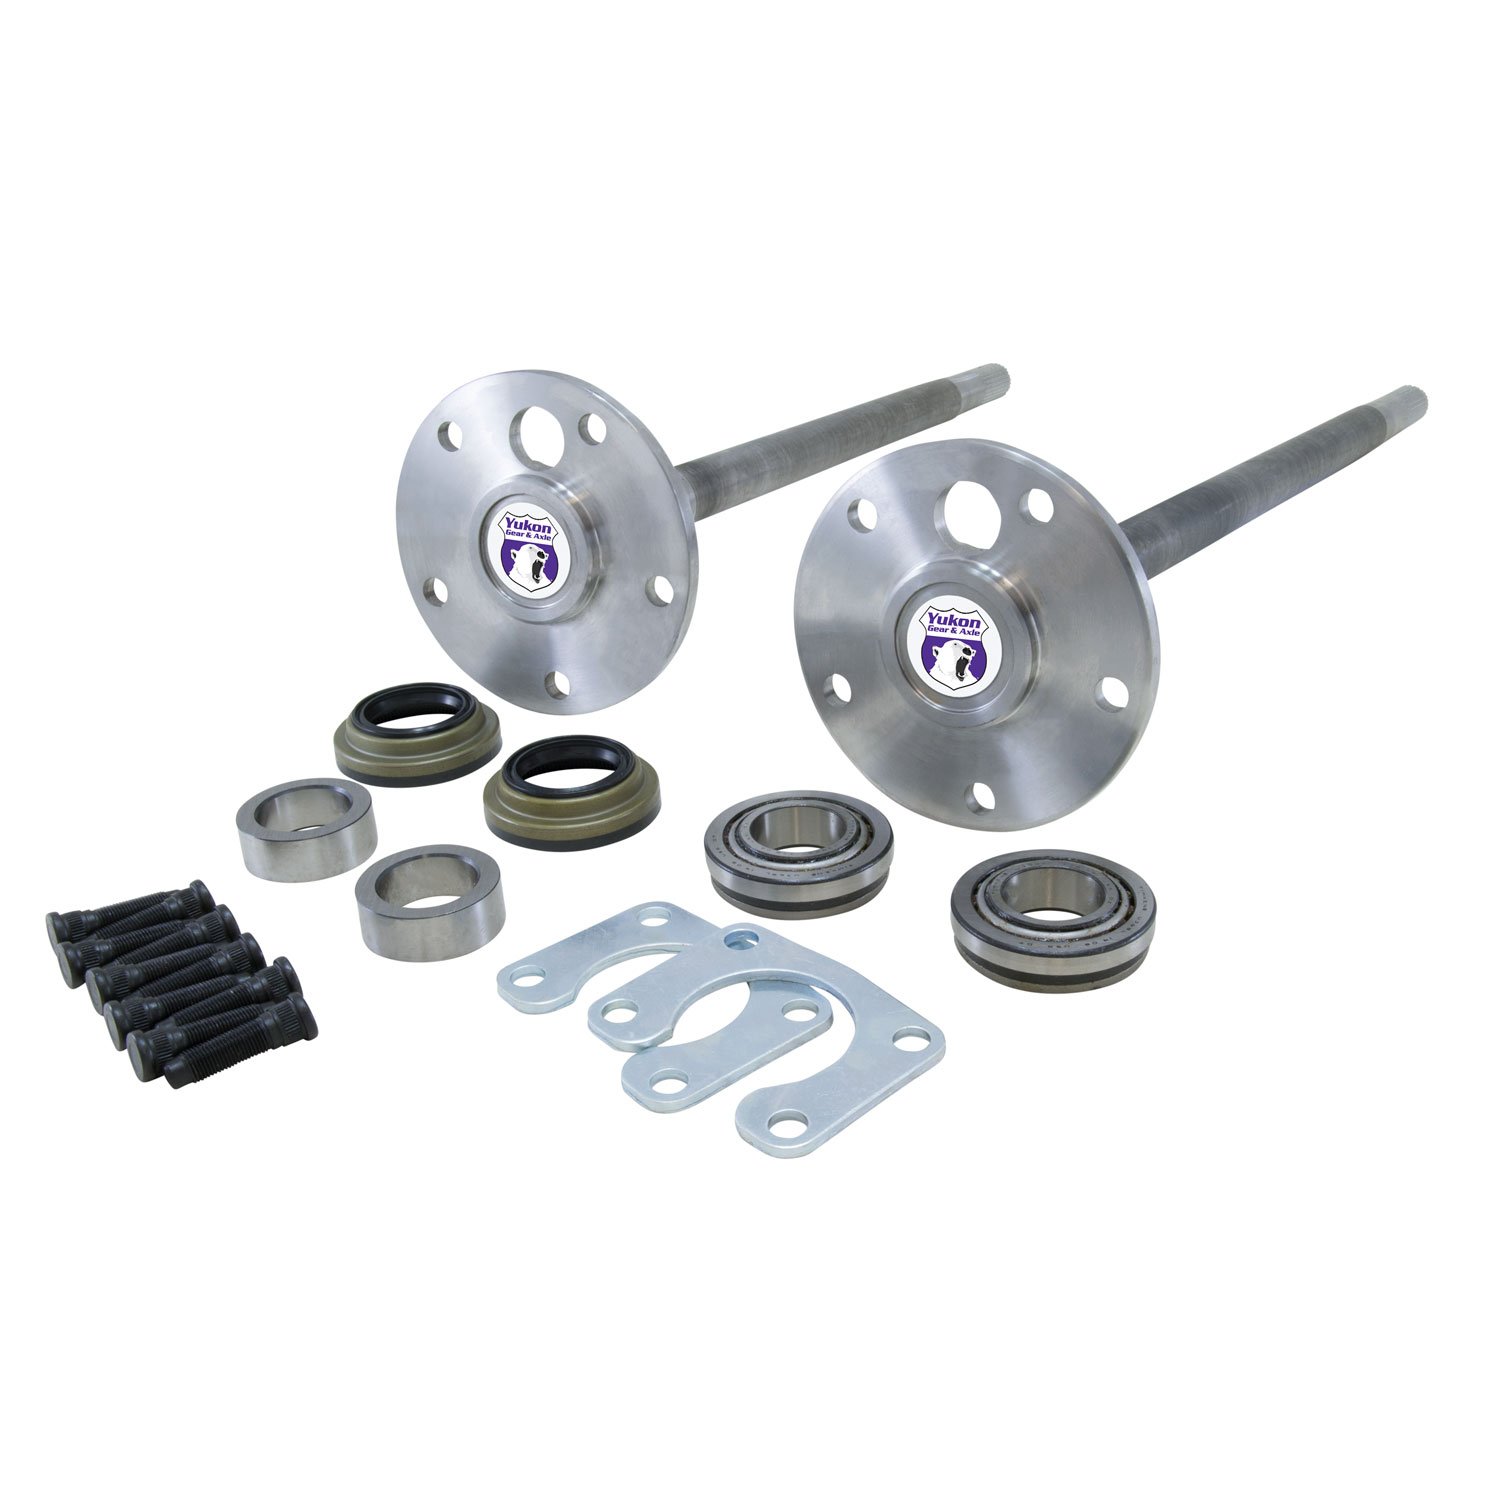 1541H Alloy Rear Axle Kit For Ford 9 in. Bronco From '74-'75 With 31 Splines